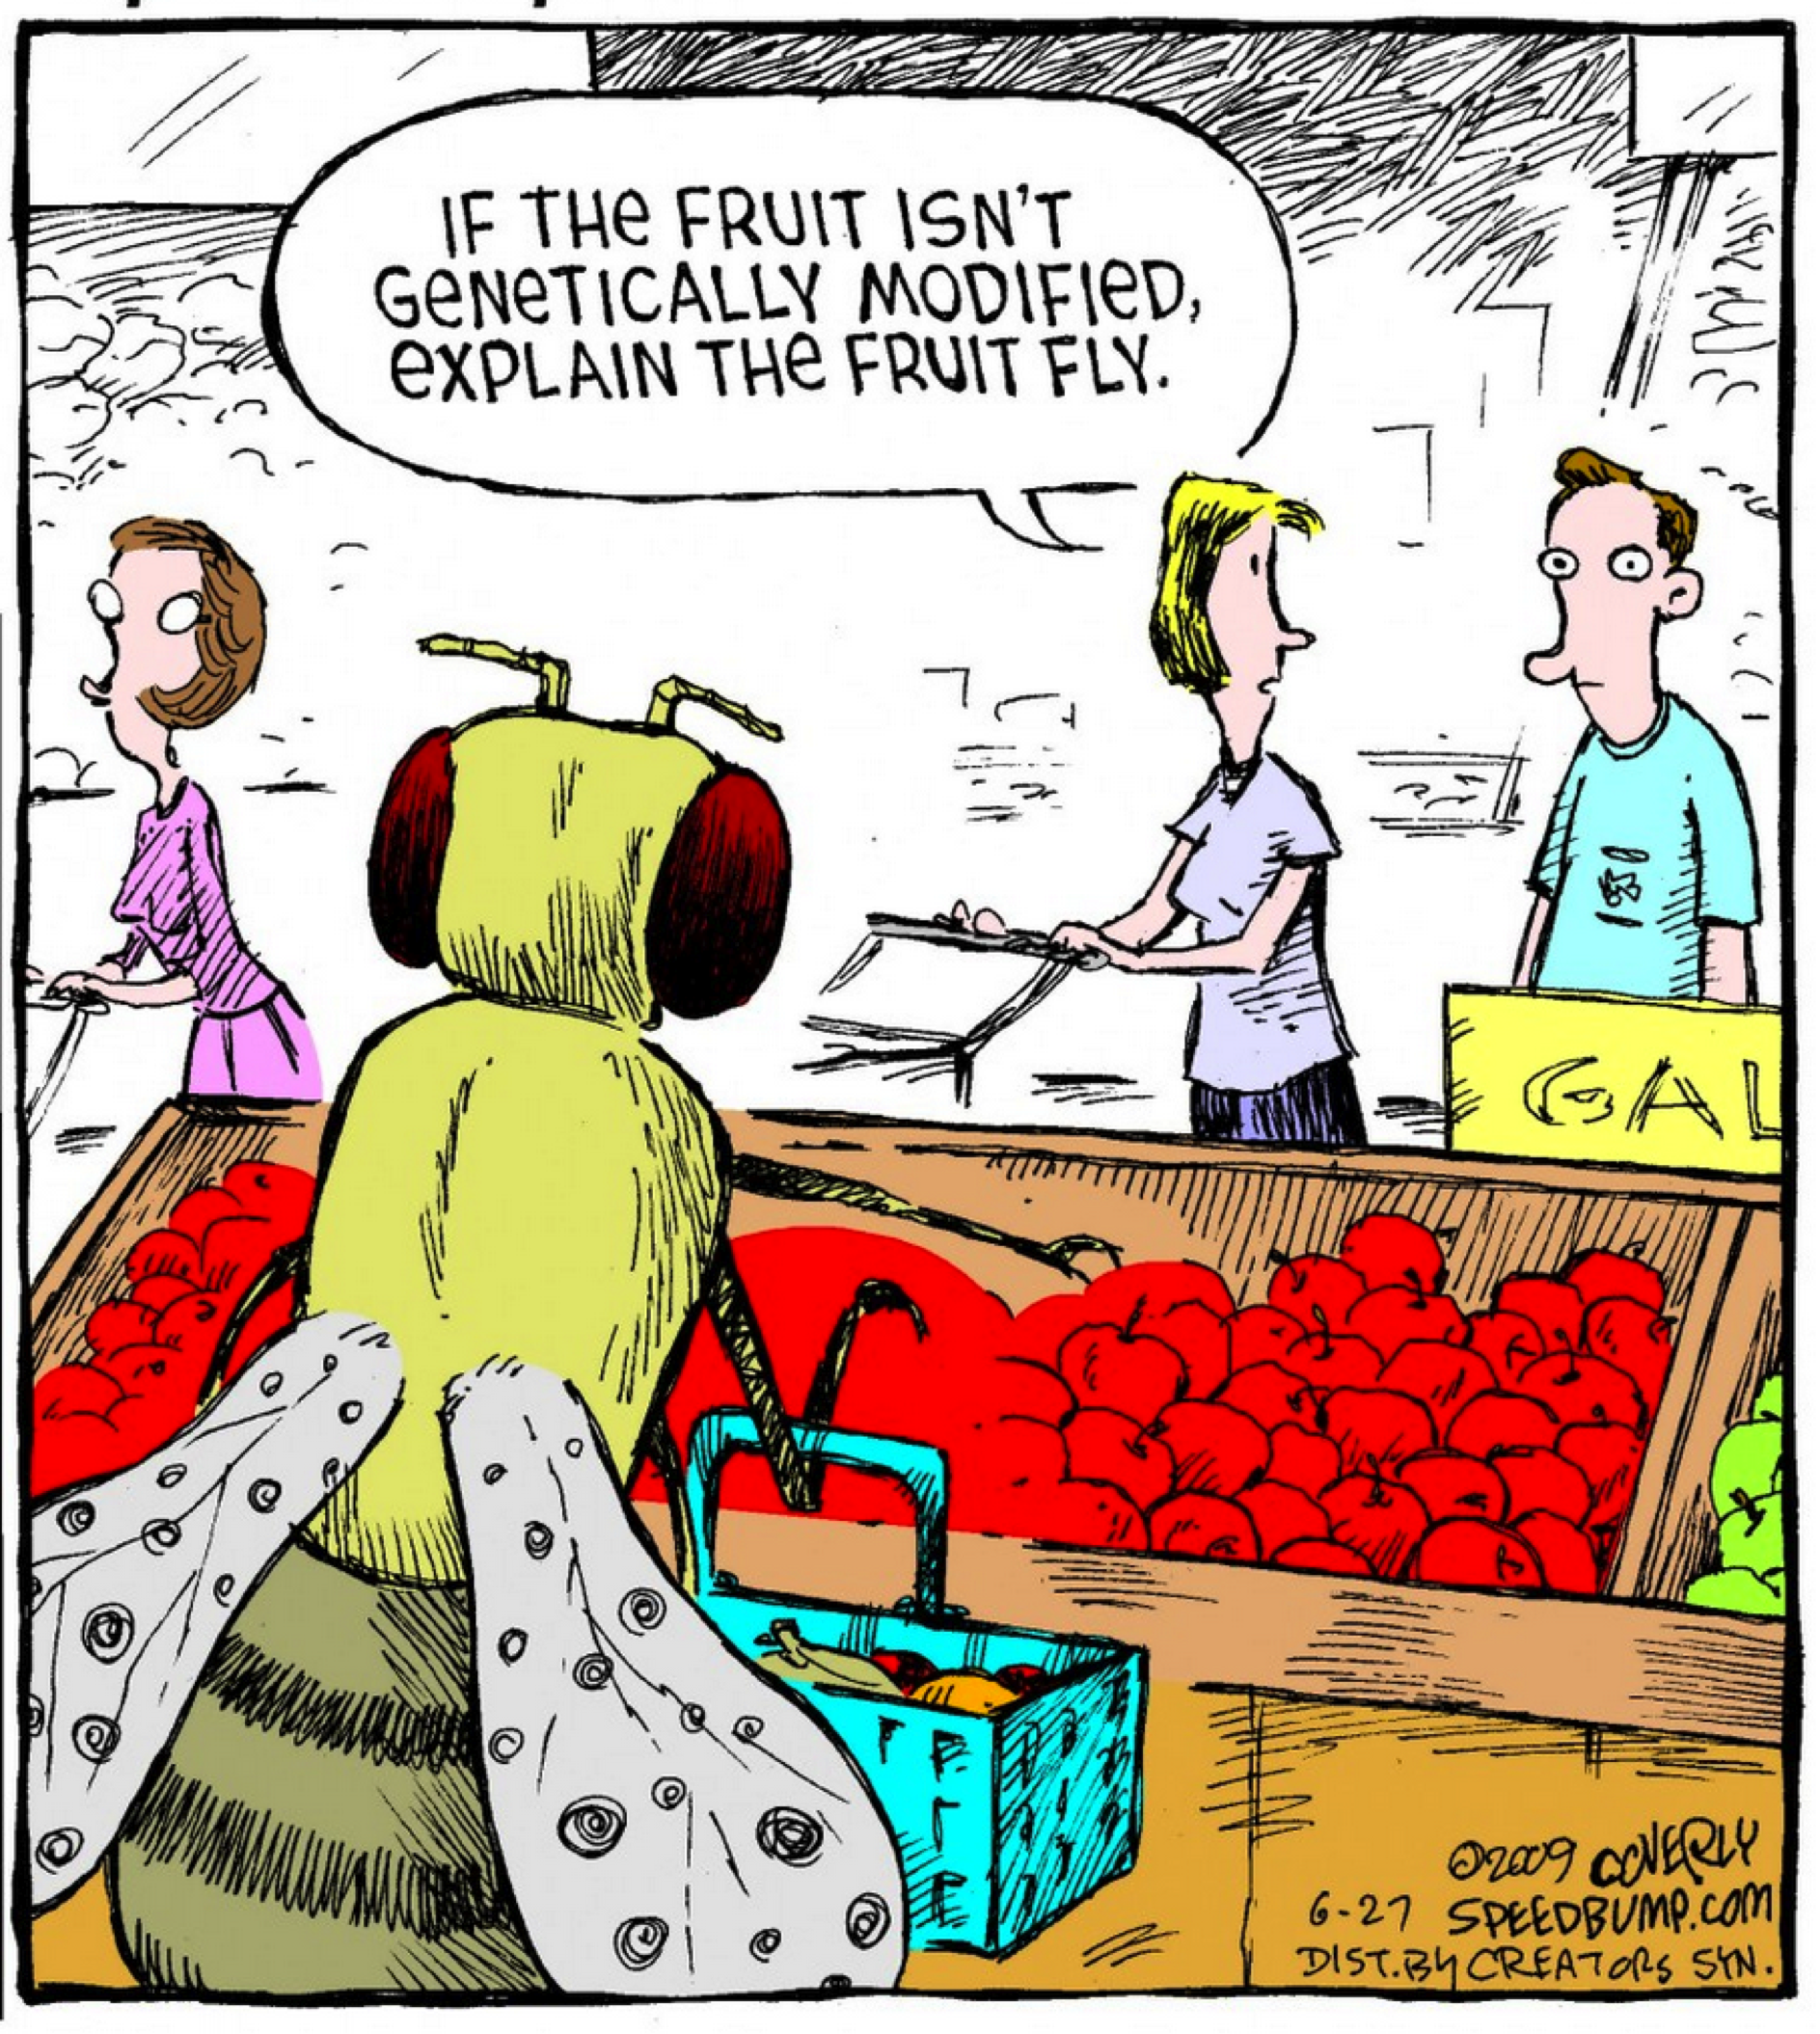 Fruit Fly GMO Cartoon - The Daily Reckoning